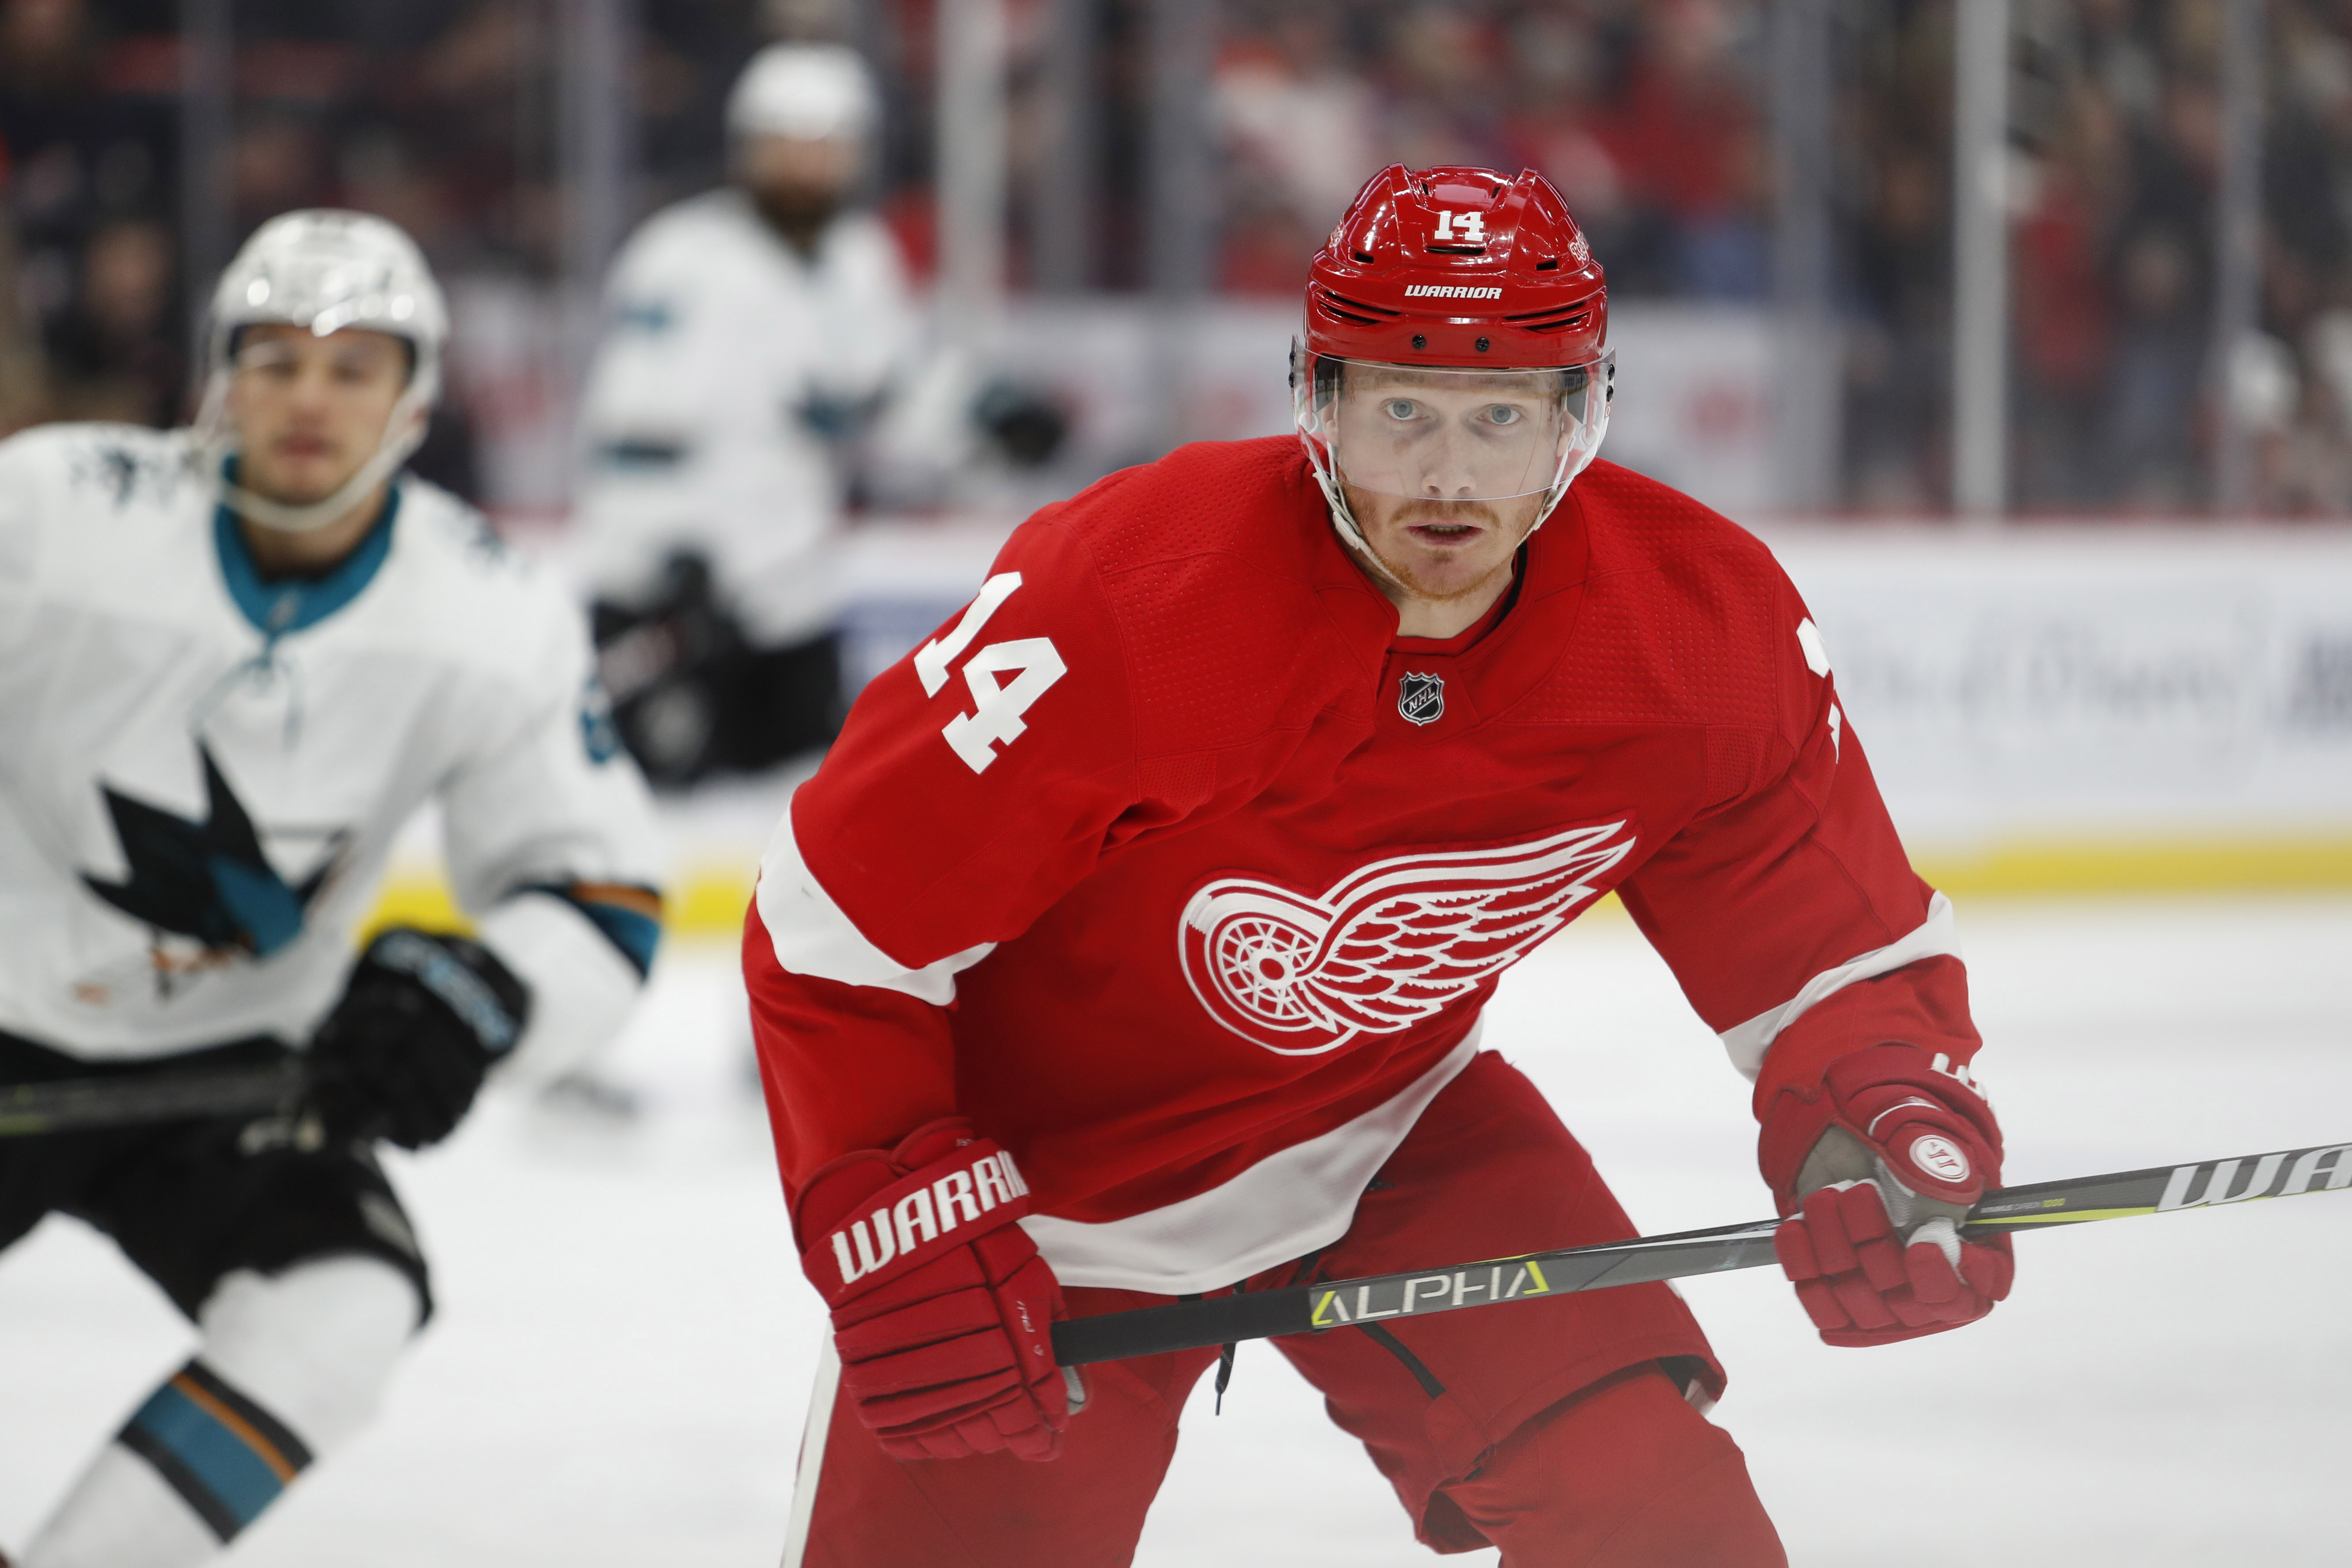 Detroit Red Wings right wing Gustav Nyquist (14) looks on from the ice during the third period against the San Jose Sharks at Little Caesars Arena.